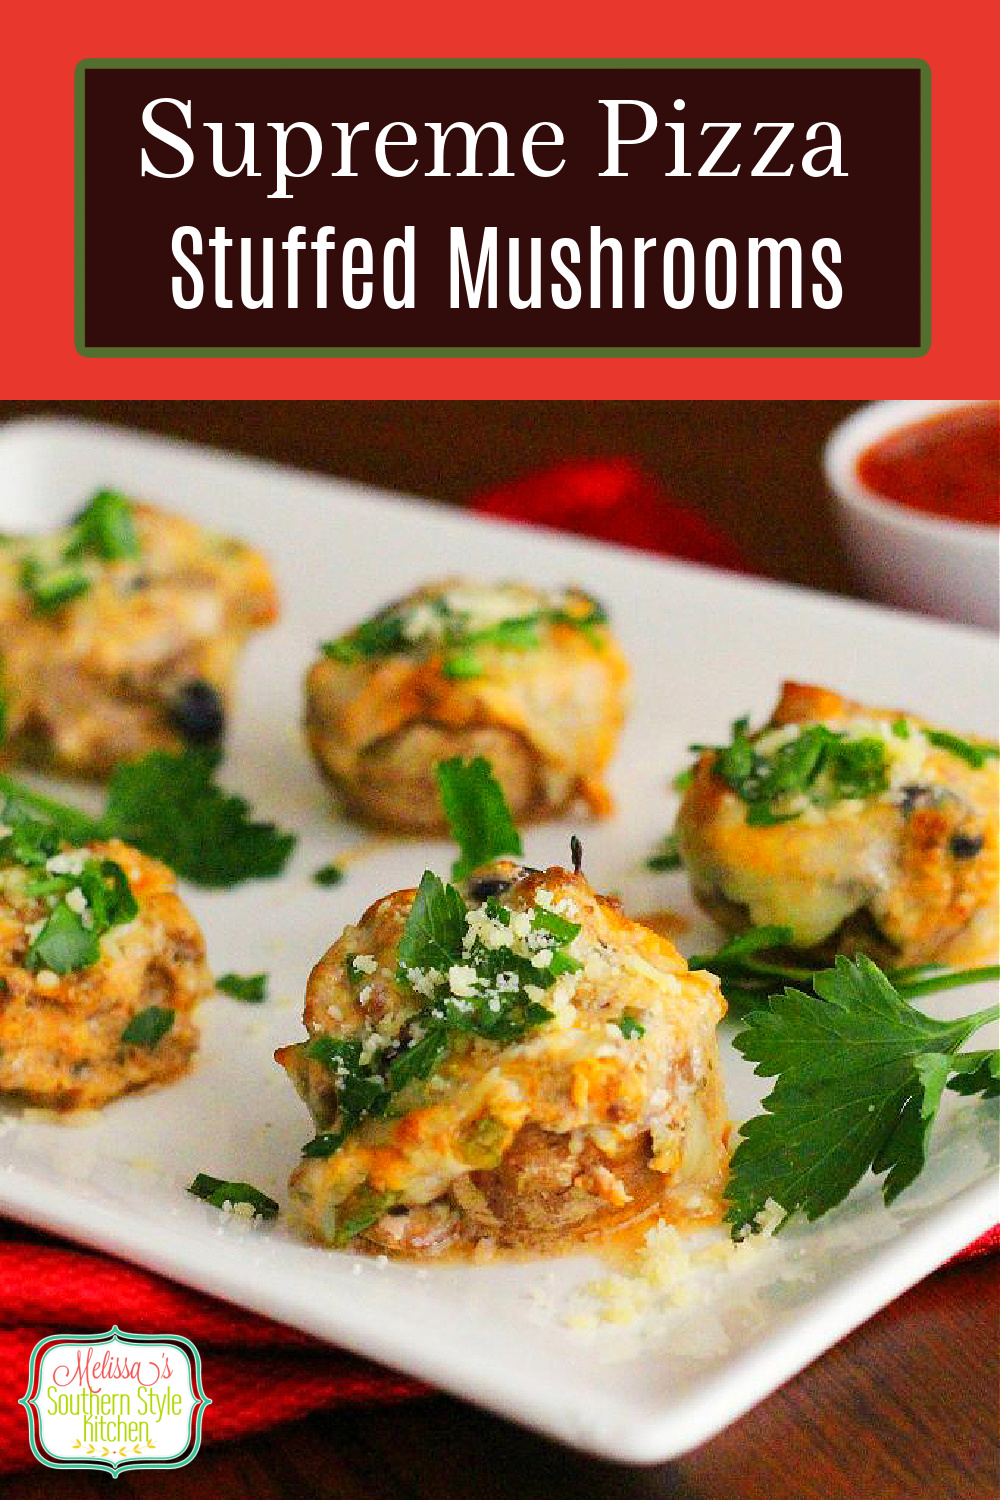 Supreme Pizza Stuffed Mushrooms #pizzastuffedmushrooms #pizzarecipes #stuffedmushrooms #supremepizza #pizza #appetizers #partyfood #easyrecipes #food #footballfood #partyfood #mushroomrecipes #tailgating #lowcarb @southernrecipes #melissassouthernstylekitchen